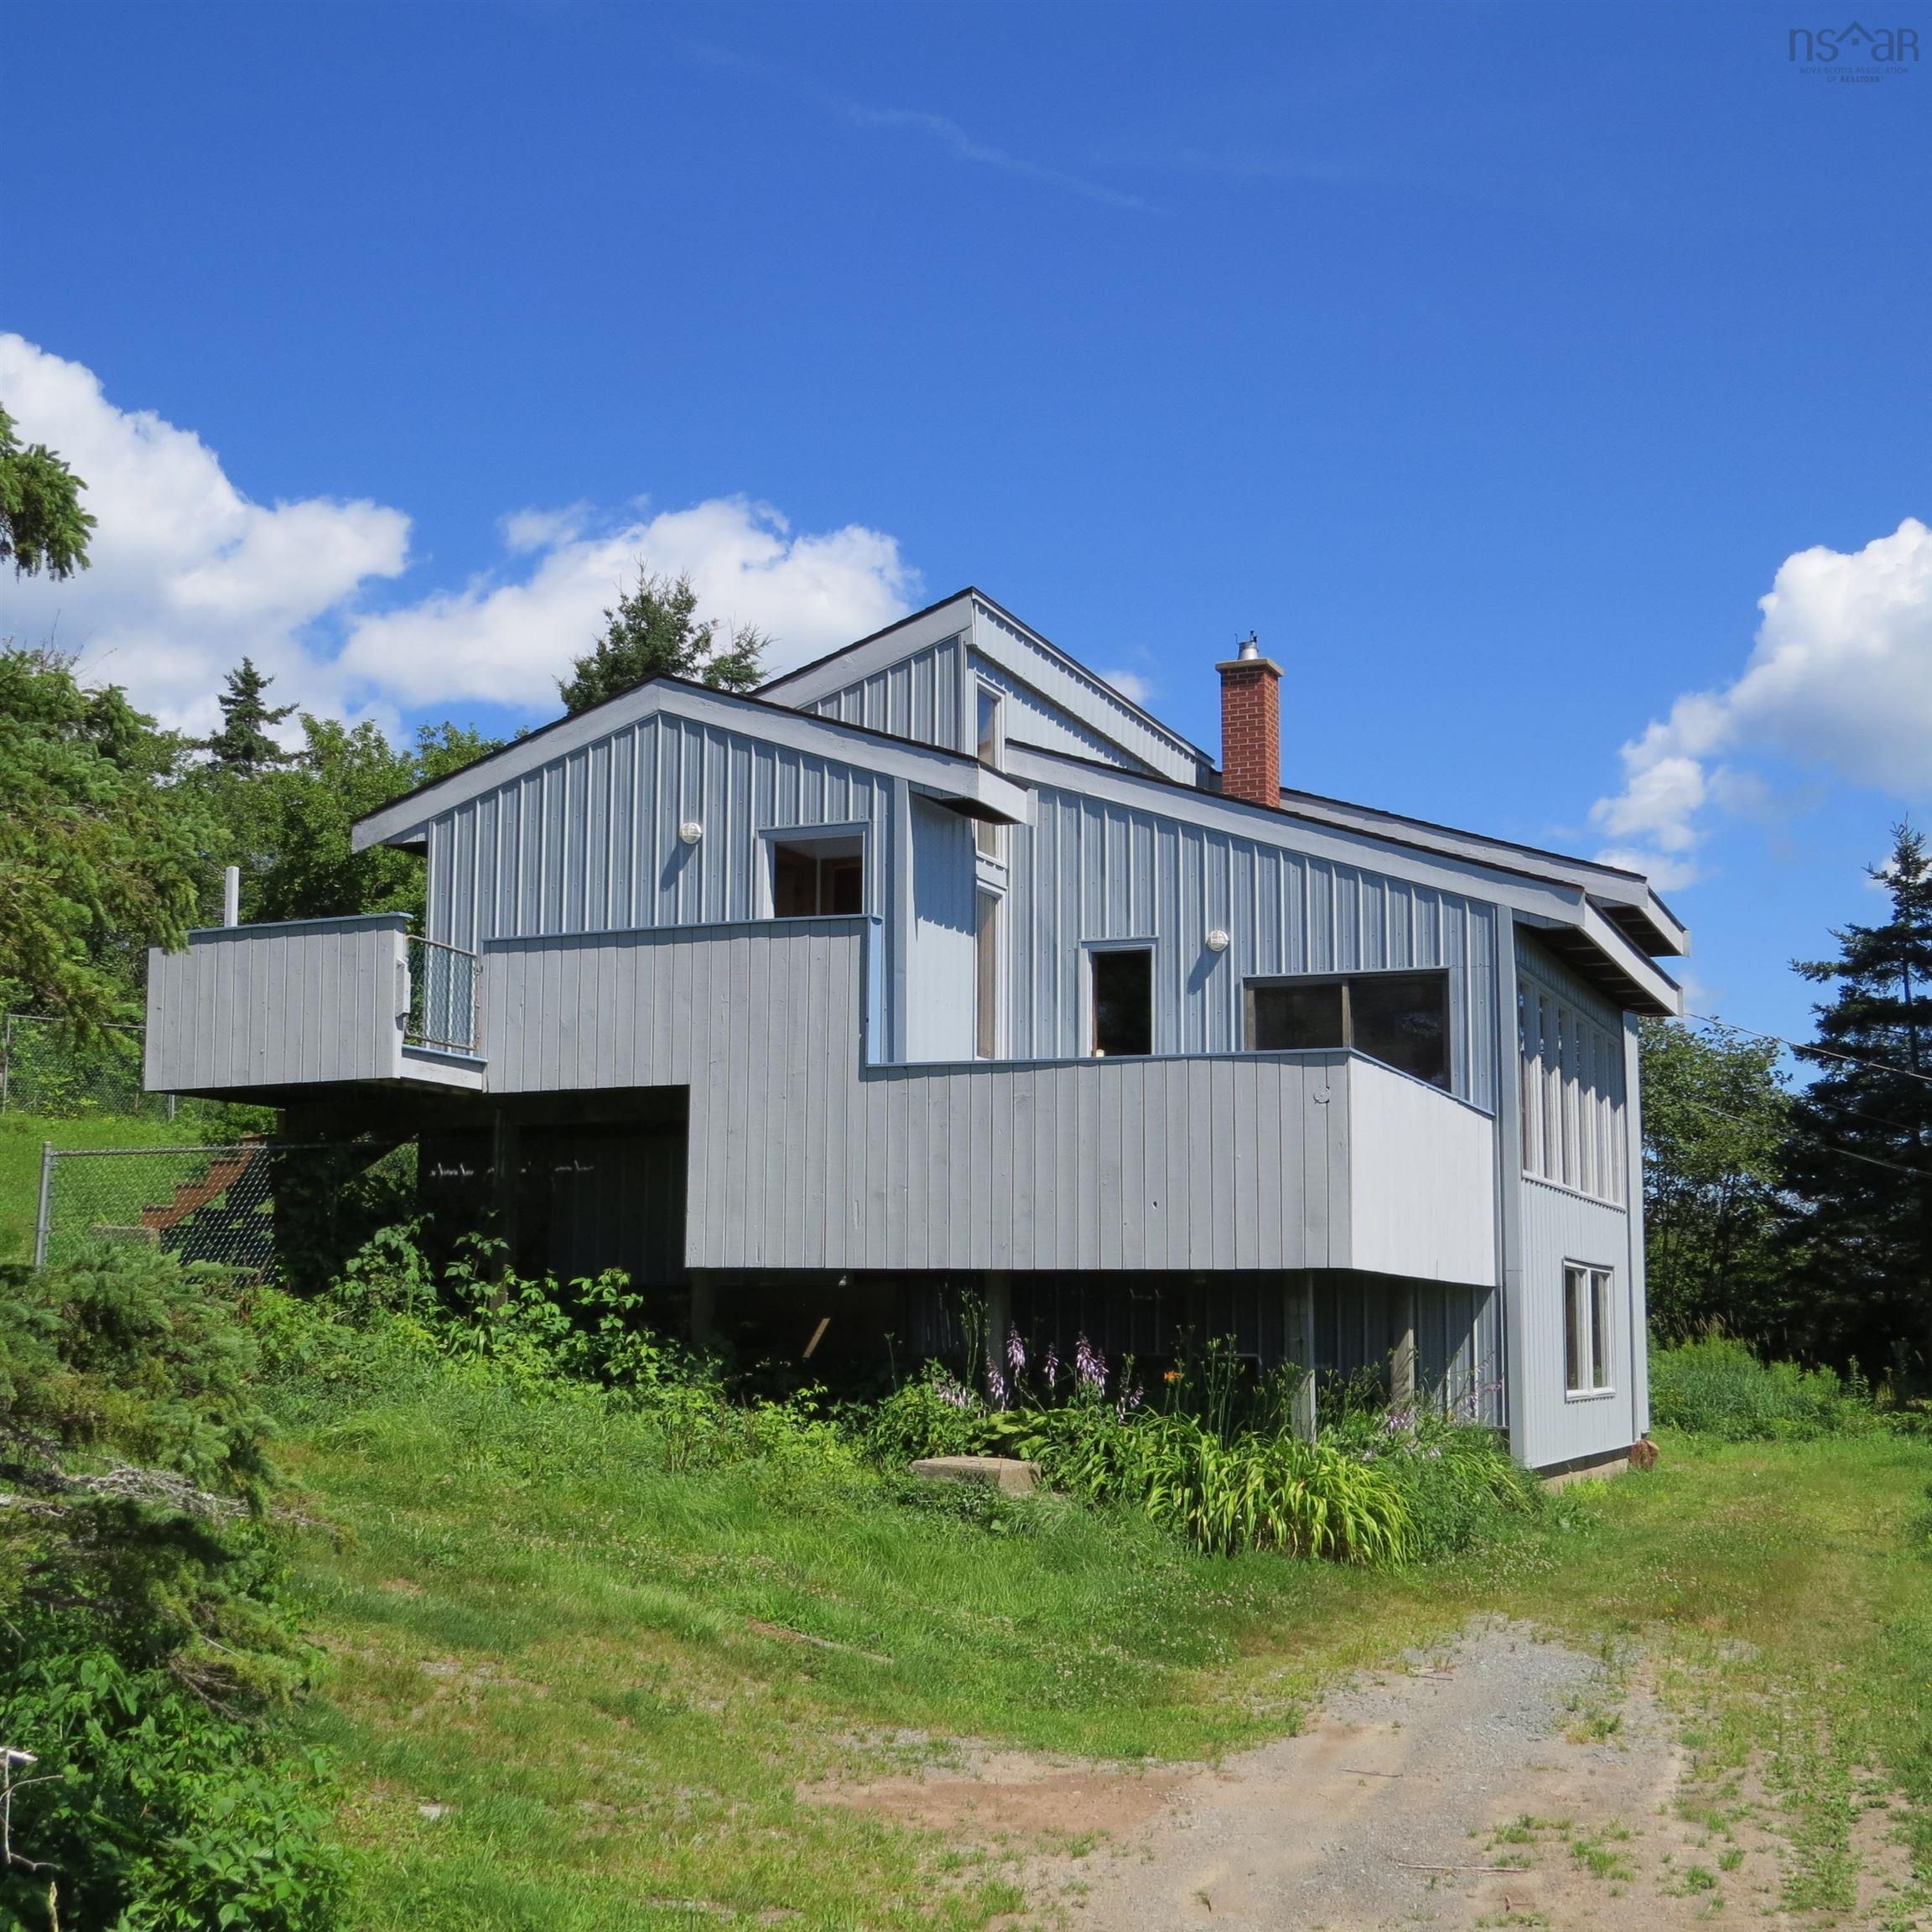 Main Photo: 149 Shore in West Chezzetcook: 31-Lawrencetown, Lake Echo, Port Residential for sale (Halifax-Dartmouth)  : MLS®# 202218759